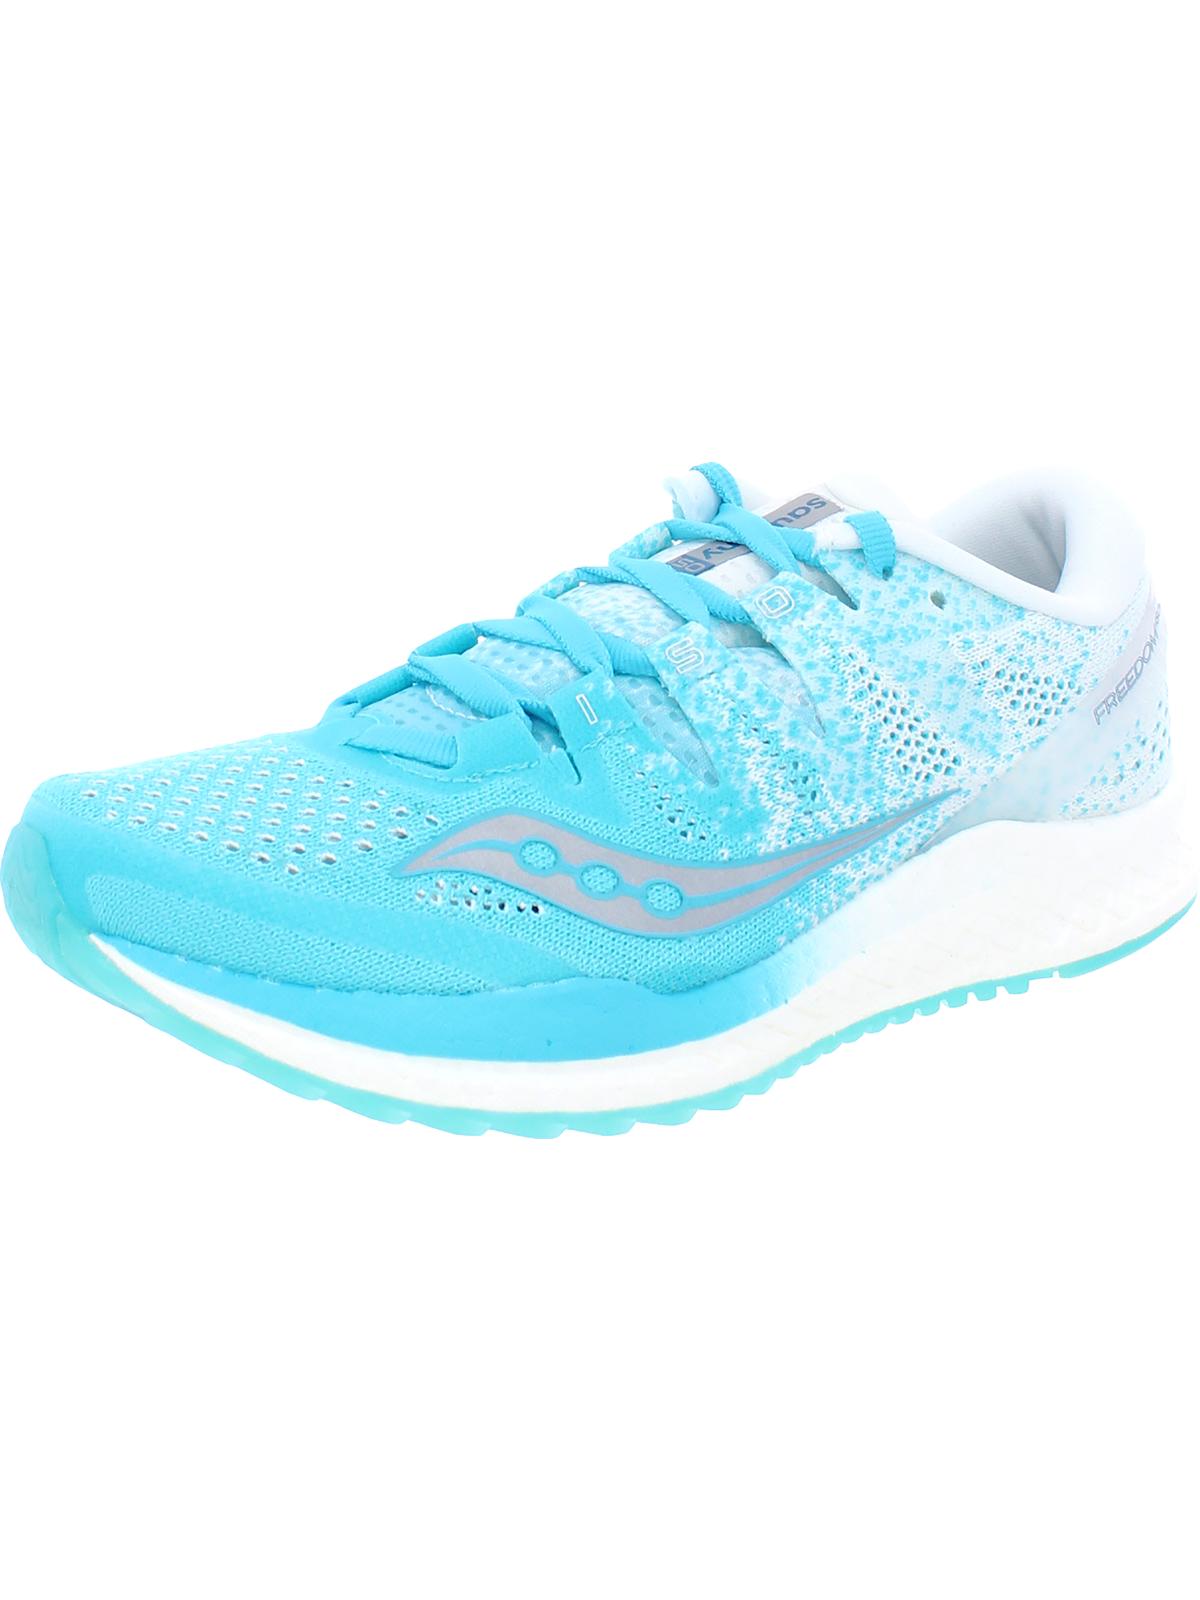 saucony lightweight shoes